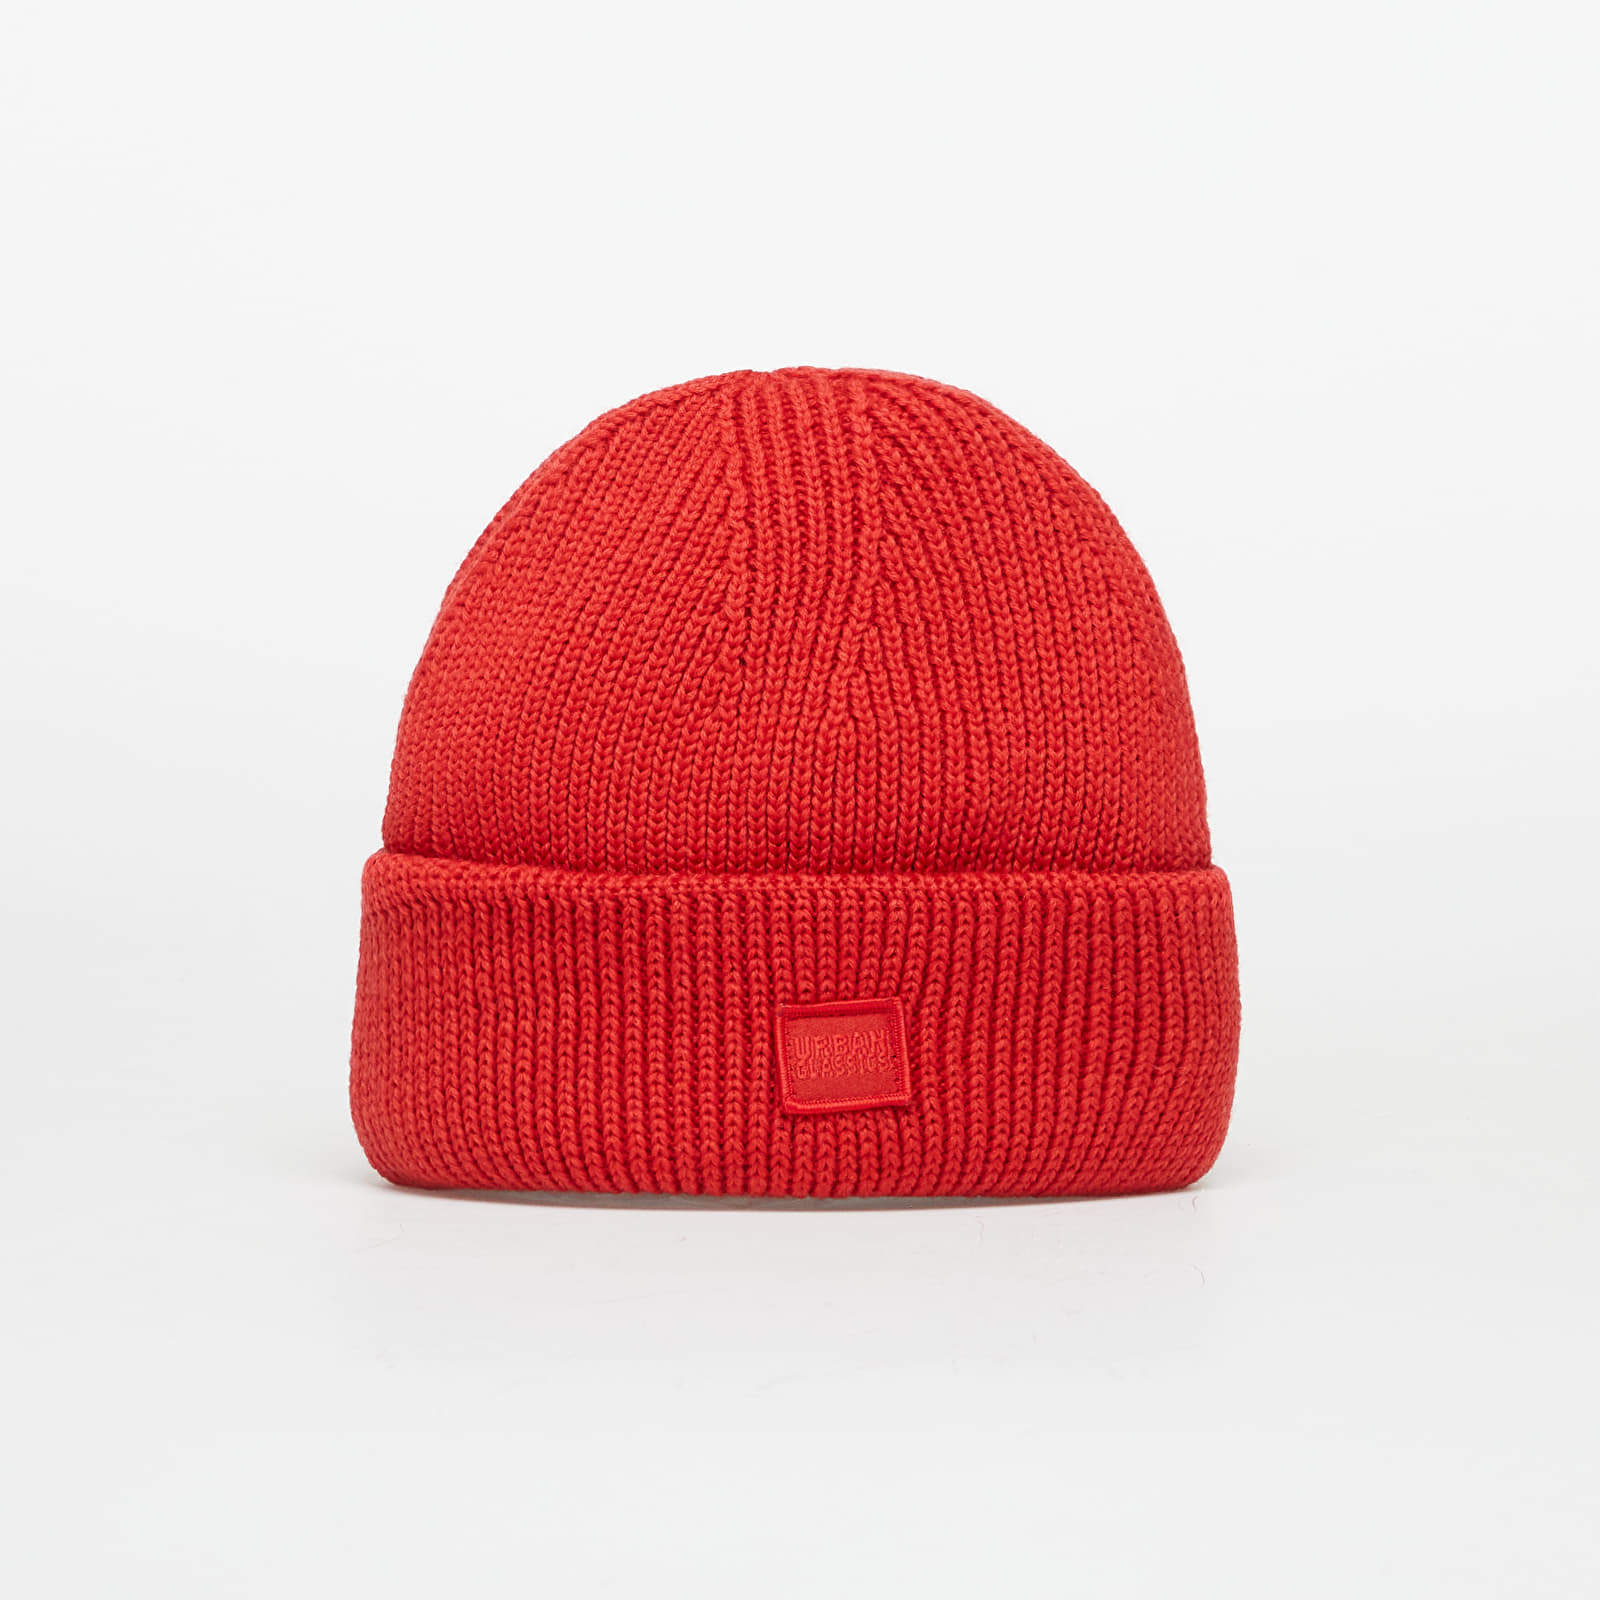 Hats | Red Urban Beanie Knitted Huge Queens Wool Classics